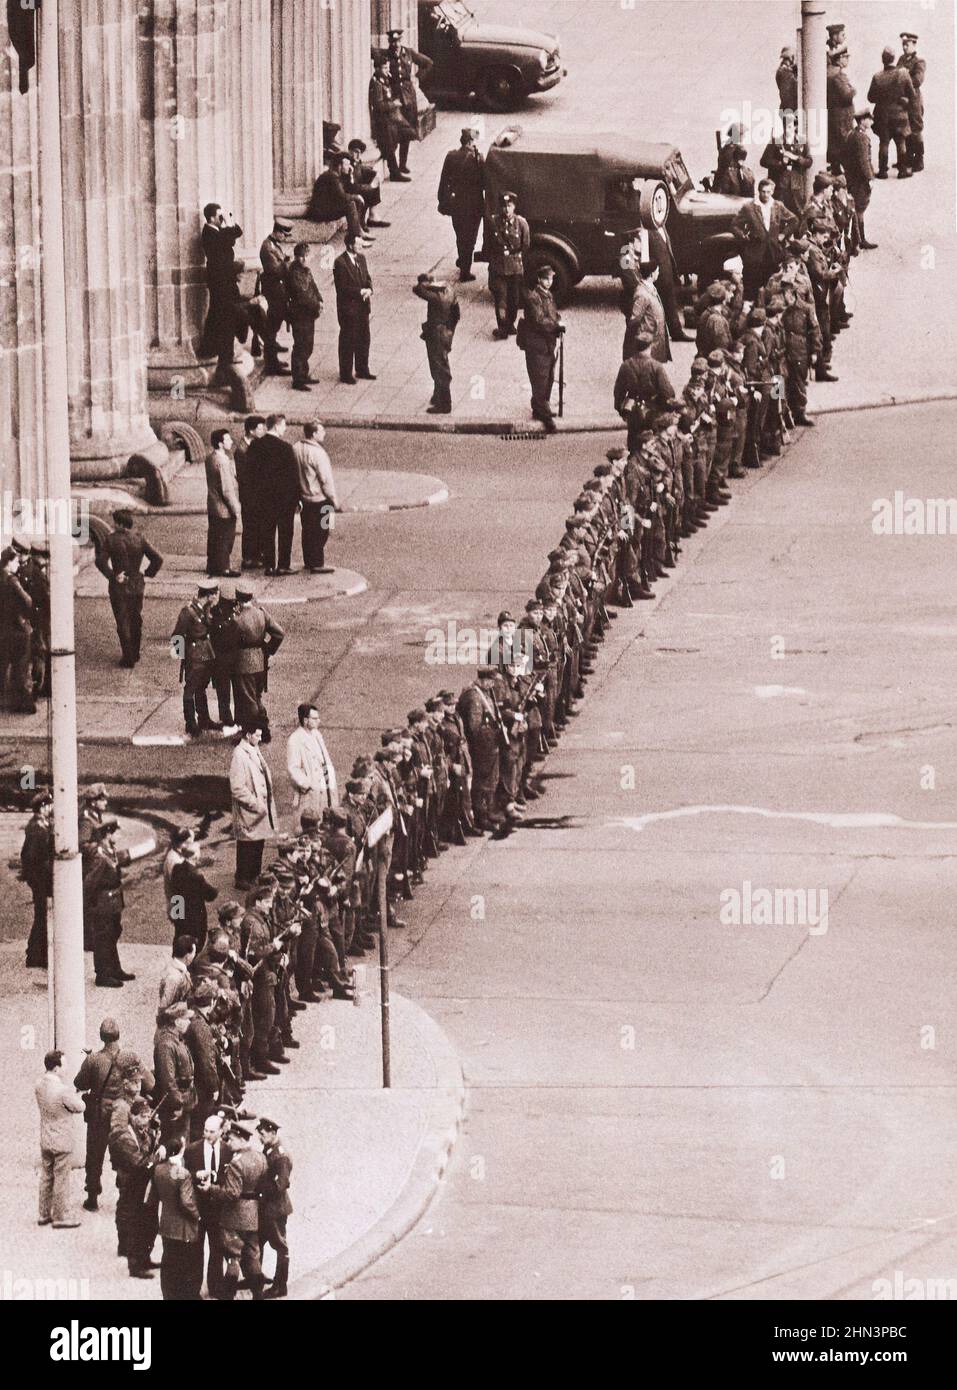 Vintage photo of Berlin Crisis of 1961: Building the Wall East German Infantrymen Line Up In Close Ranks to Seal Off Berlin's Key Border Crossing Poin Stock Photo